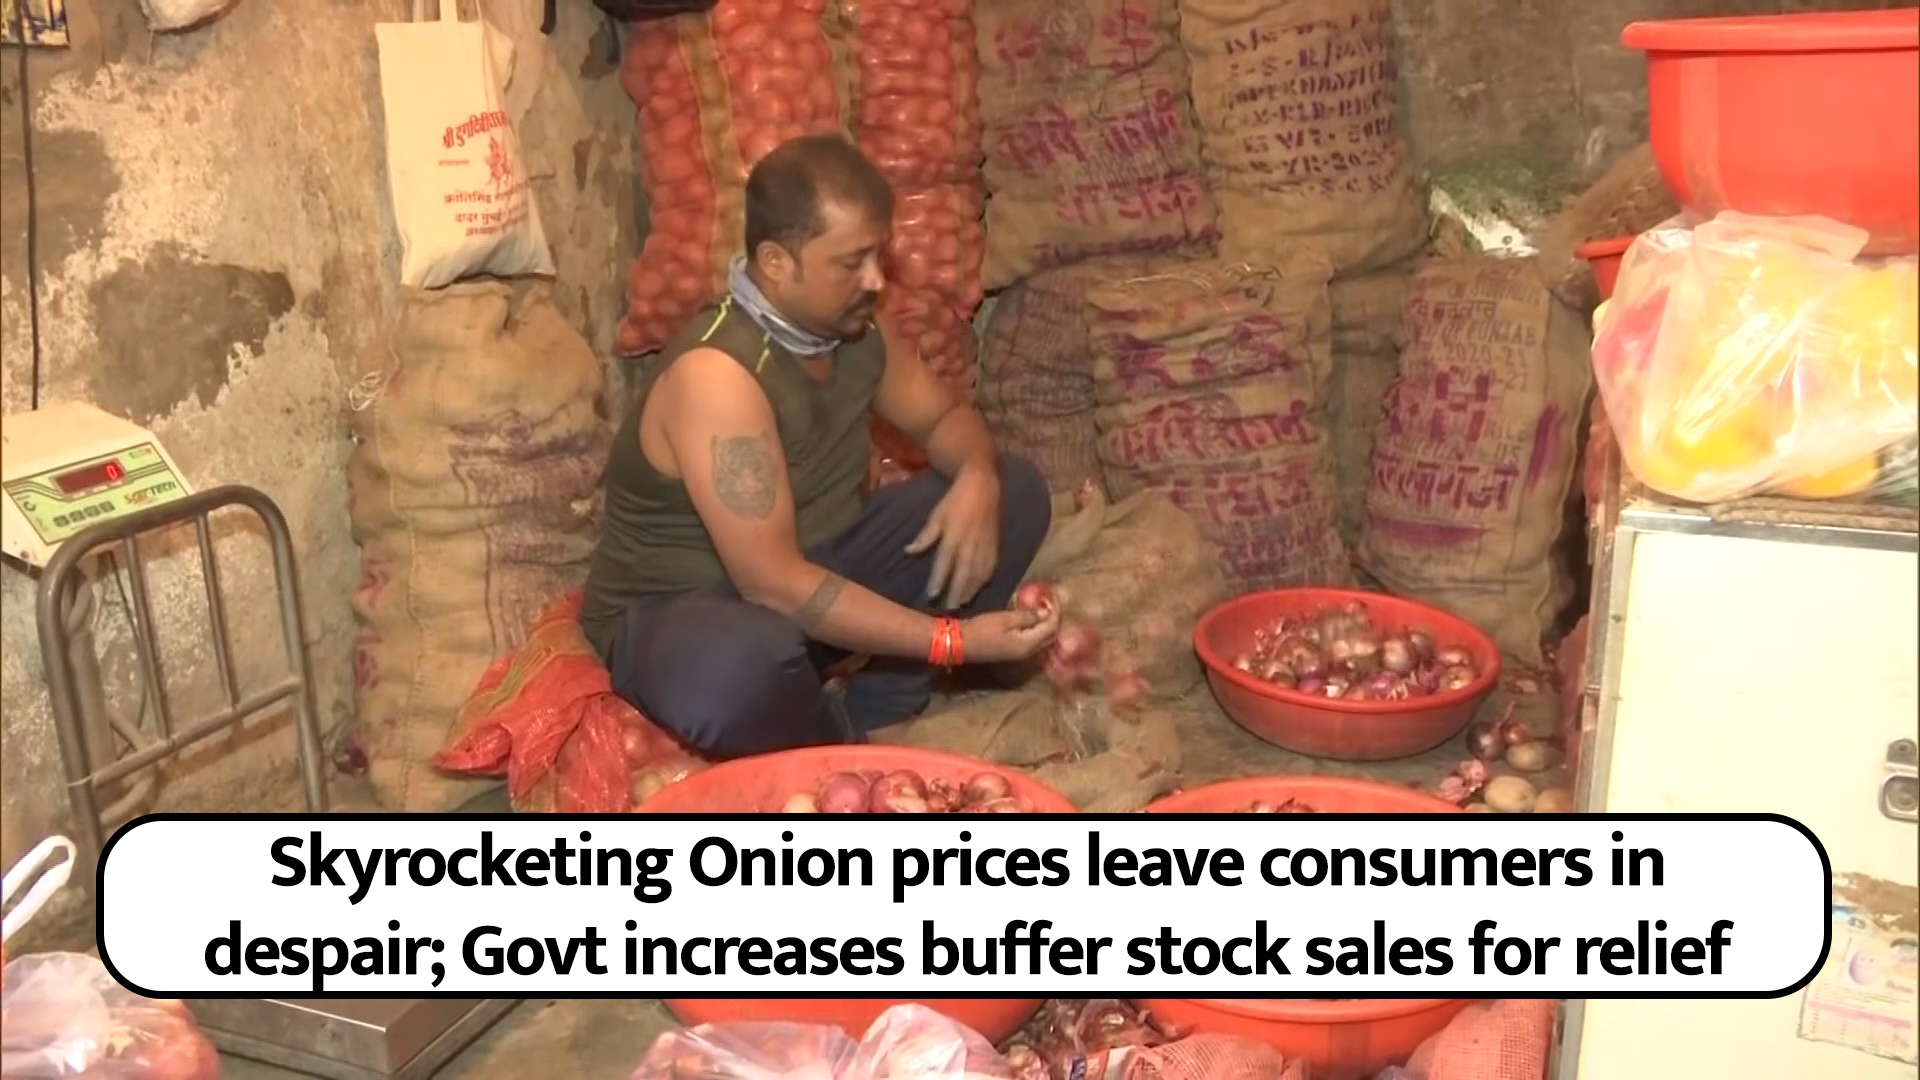 Skyrocketing Onion prices leave consumers in despair; Government increases buffer stock sales for relief